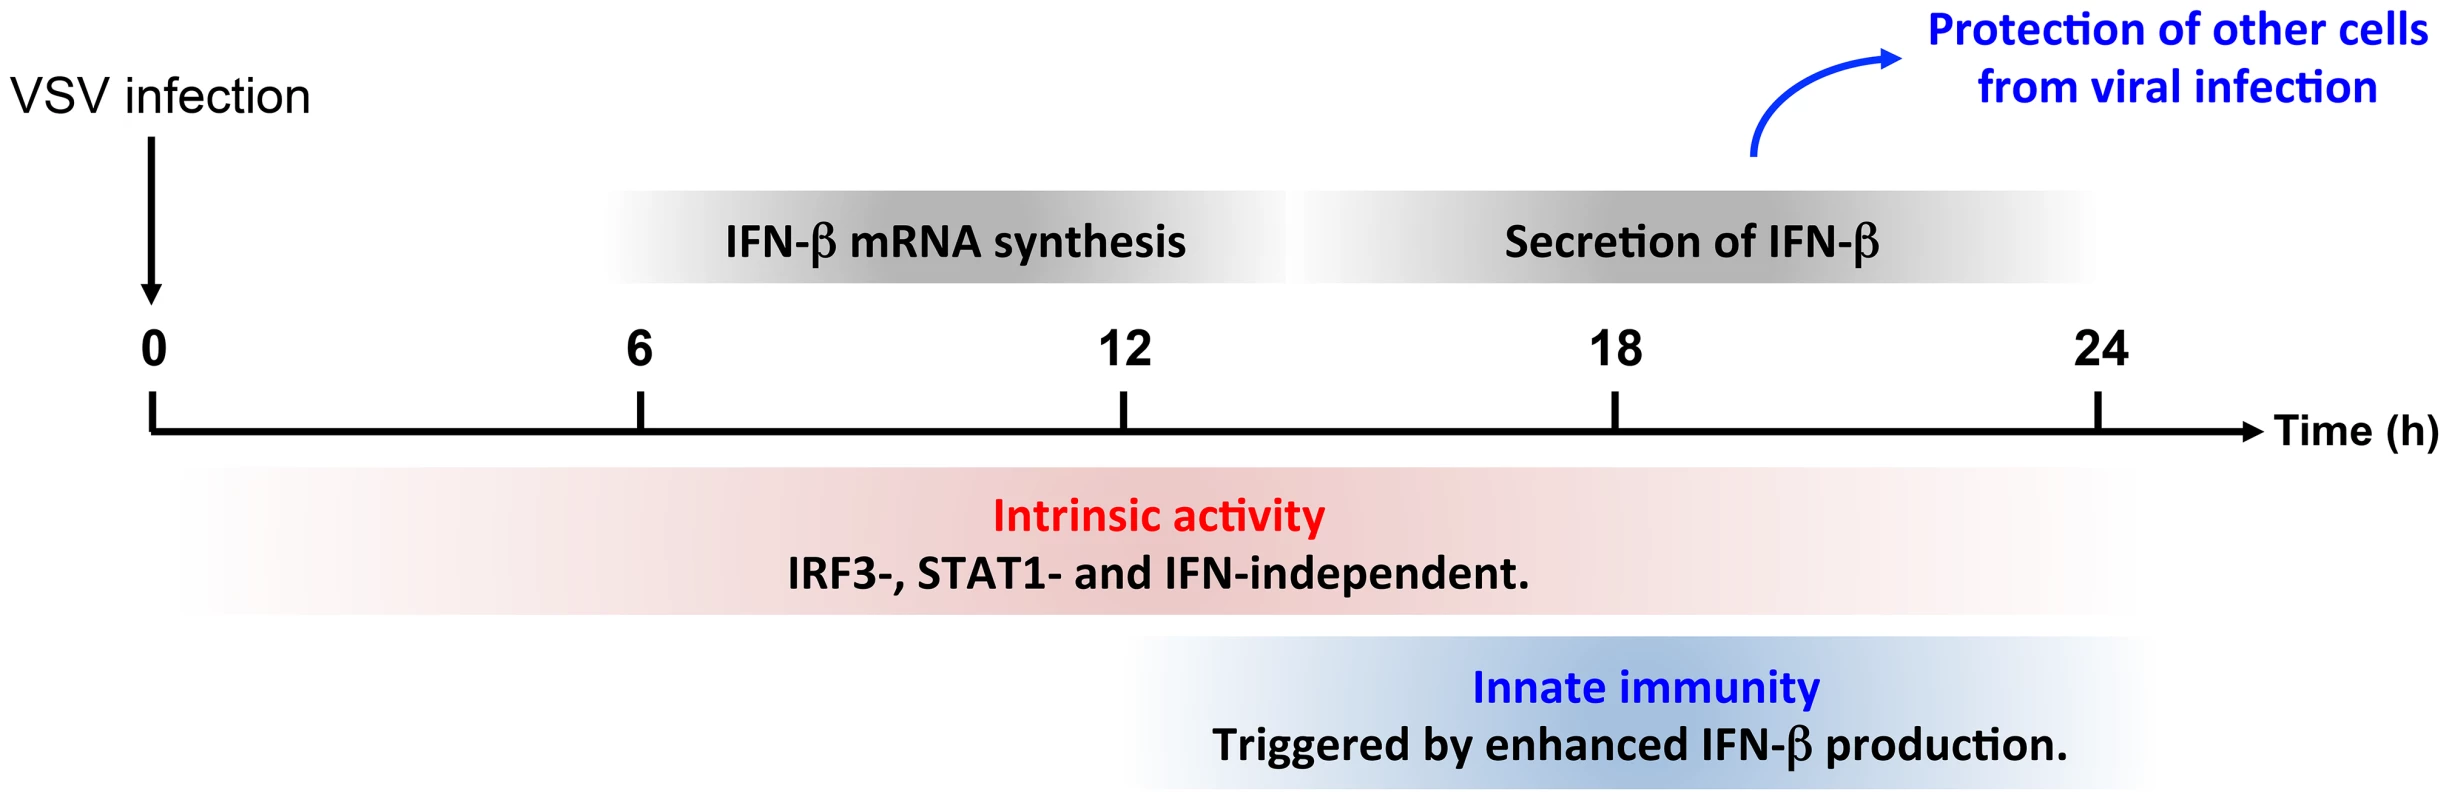 Intrinsic and innate immune properties of PMLIV during viral infection.